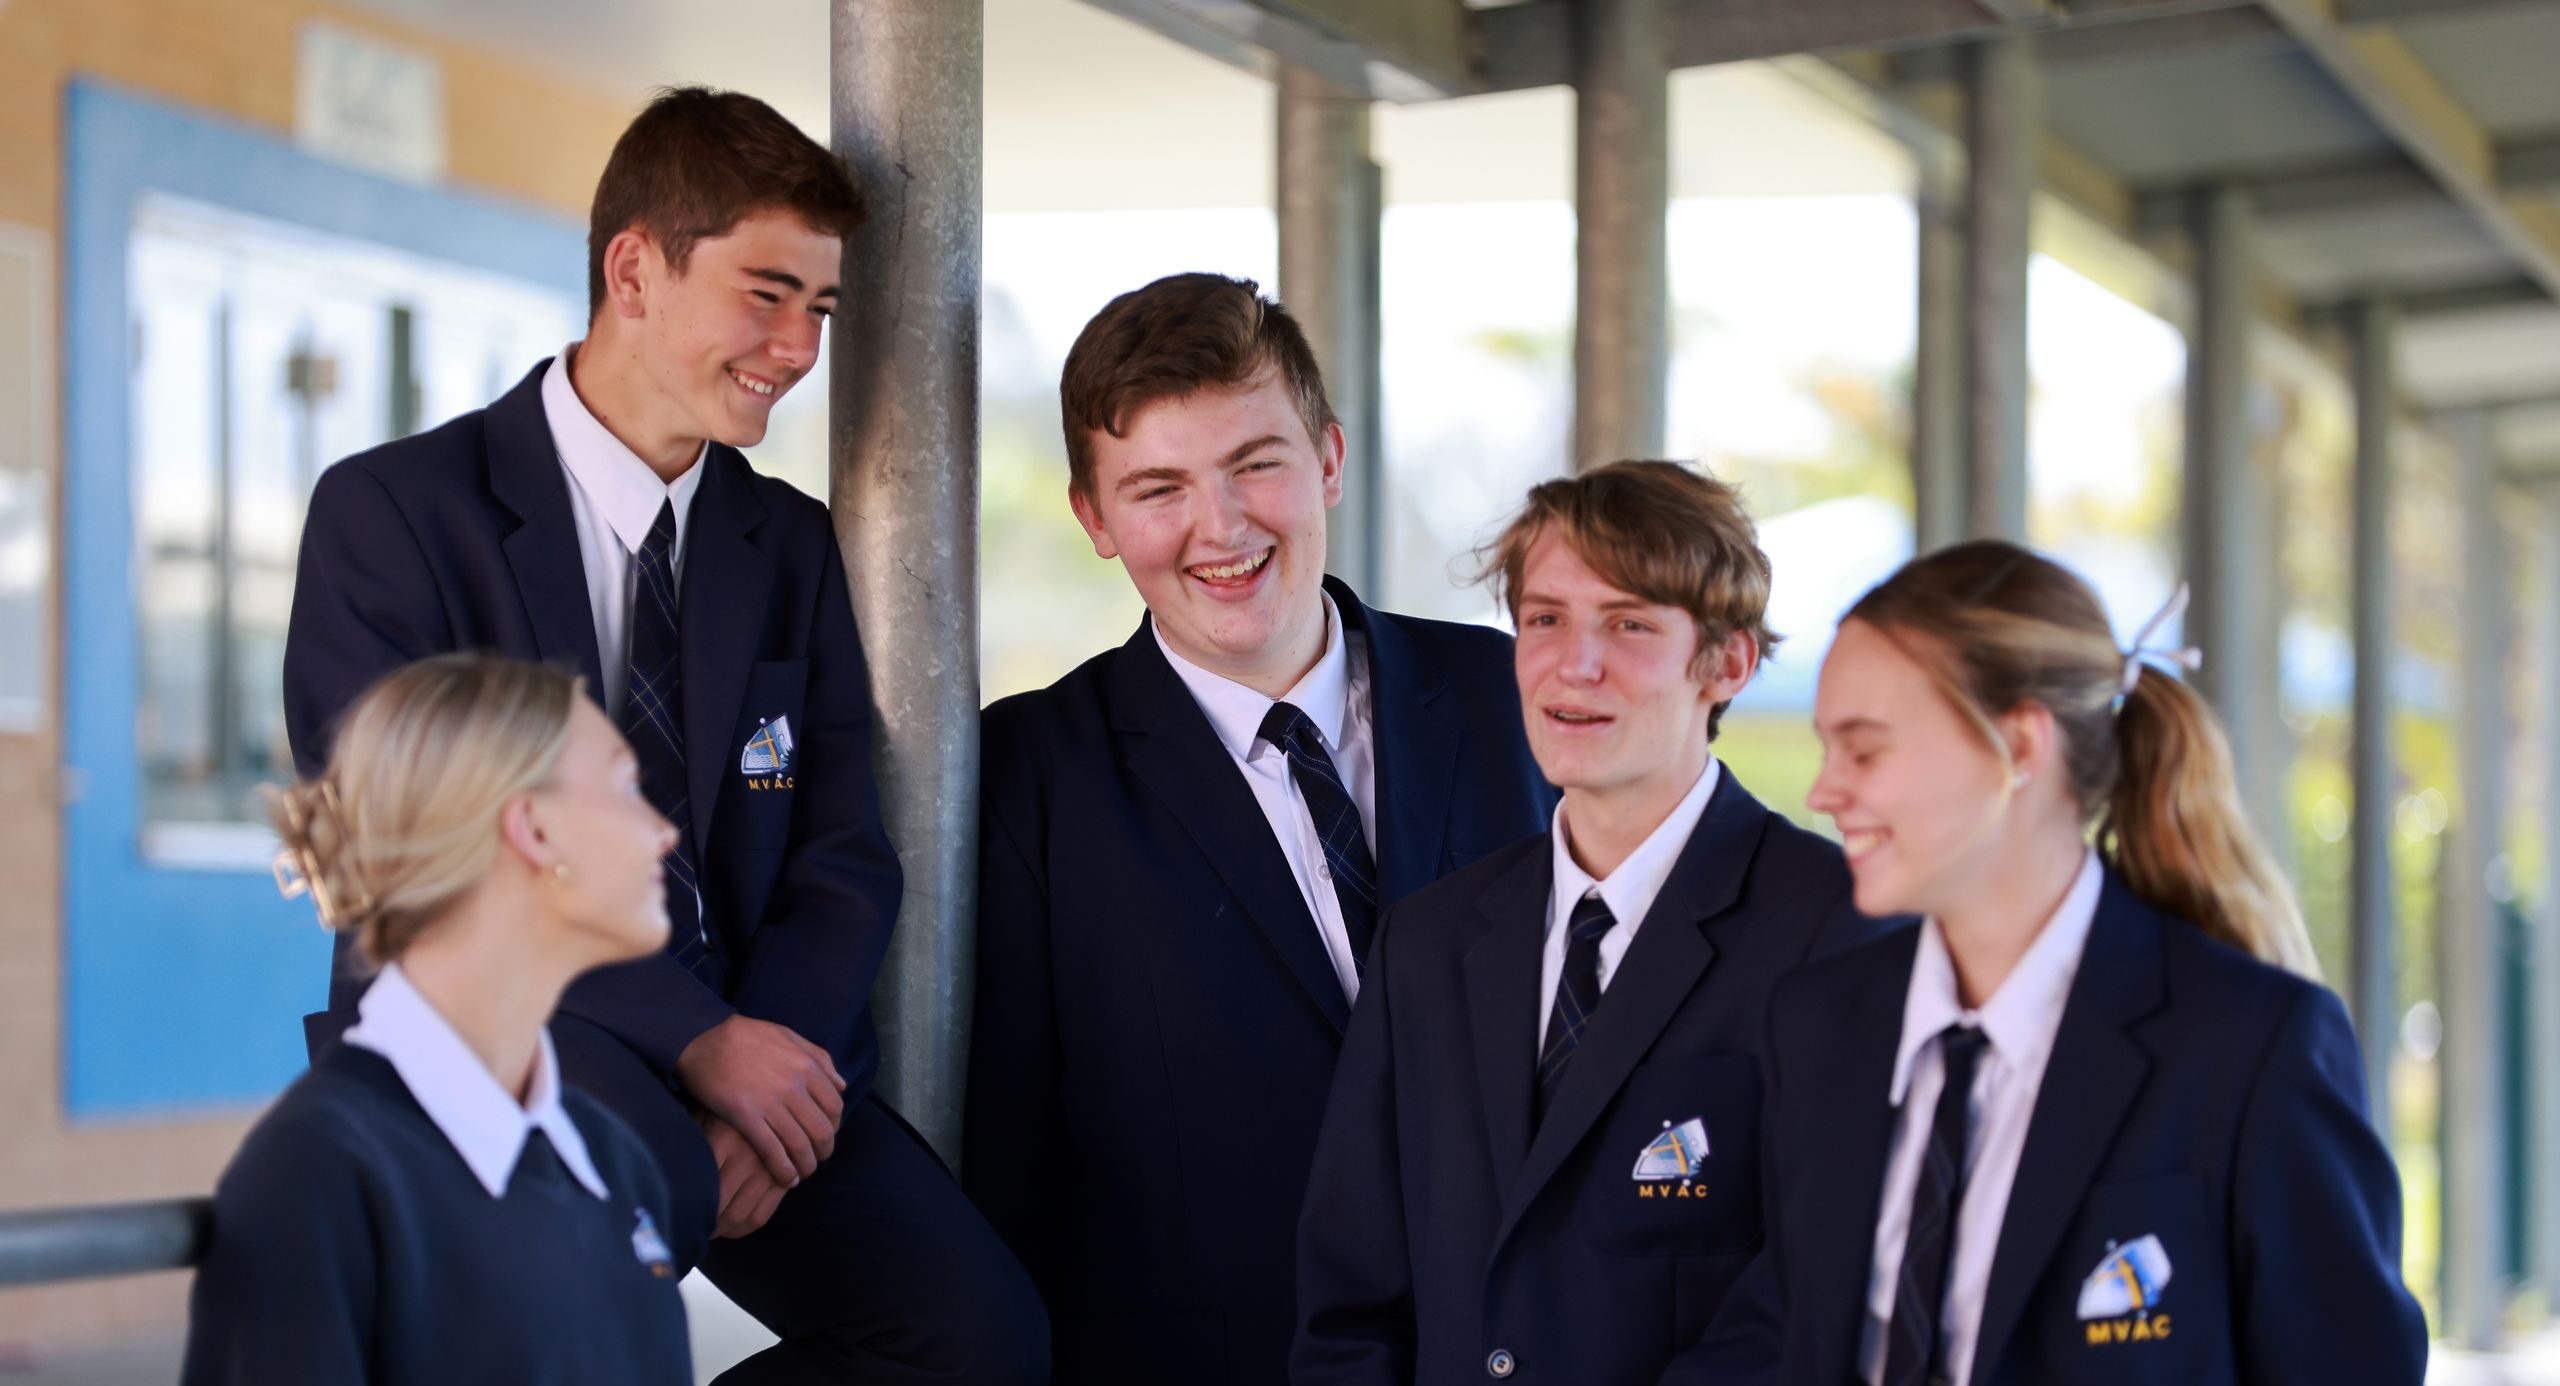 Five Senior Students wearing the Navy College blazer together laughing.